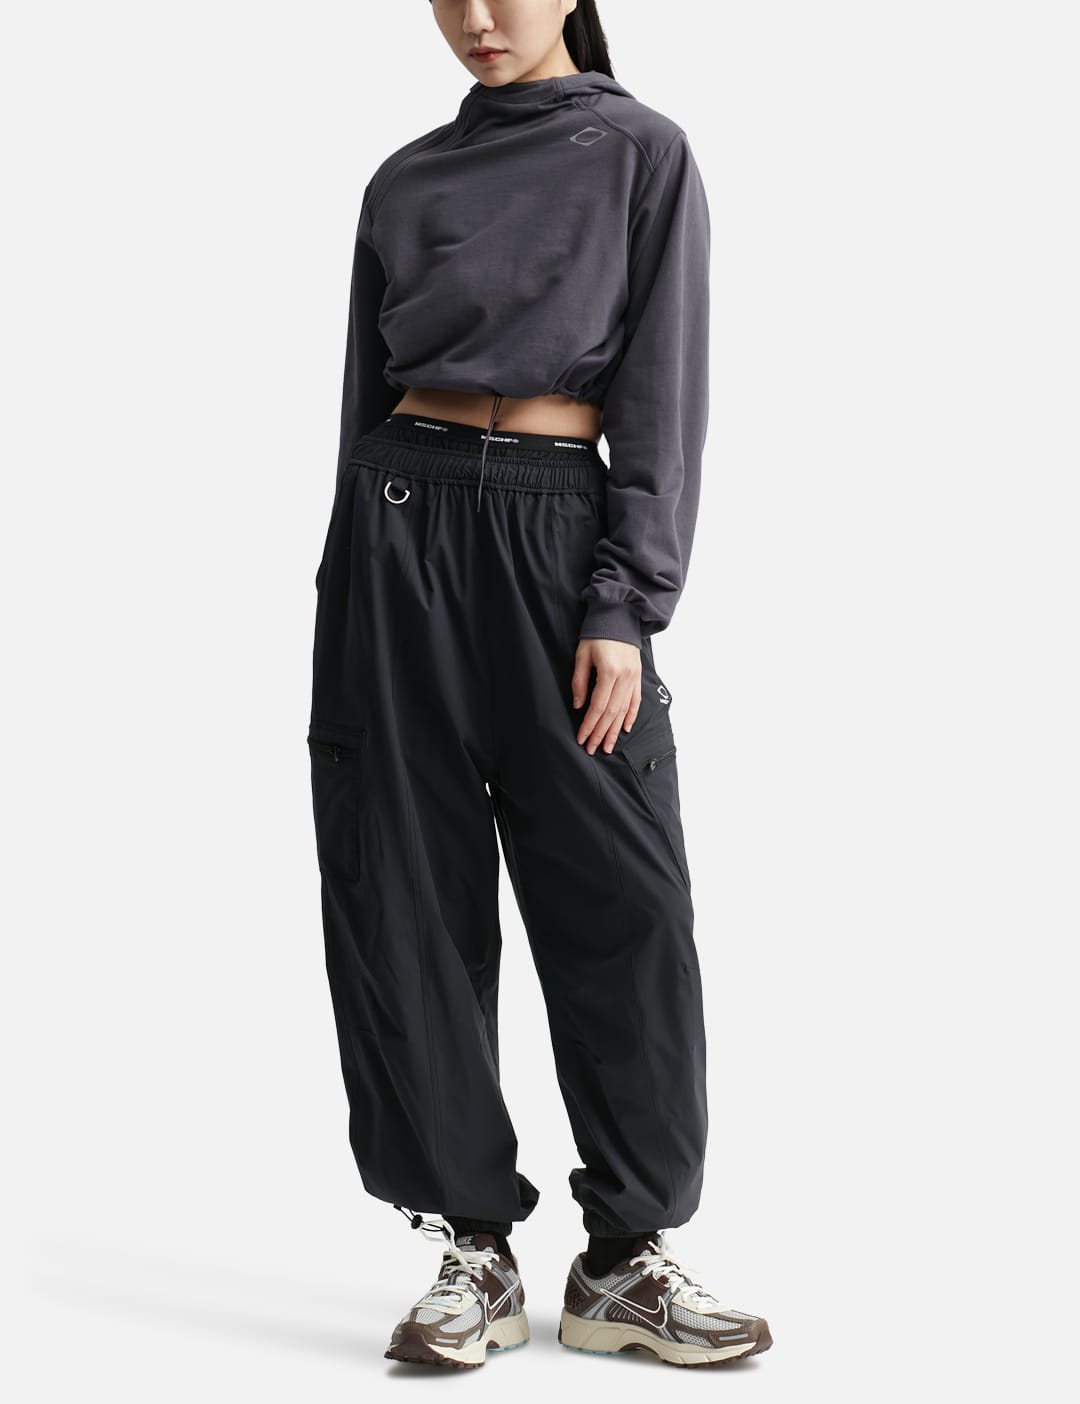 MISCHIEF - Lightweight Track Pants | HBX - Globally Curated